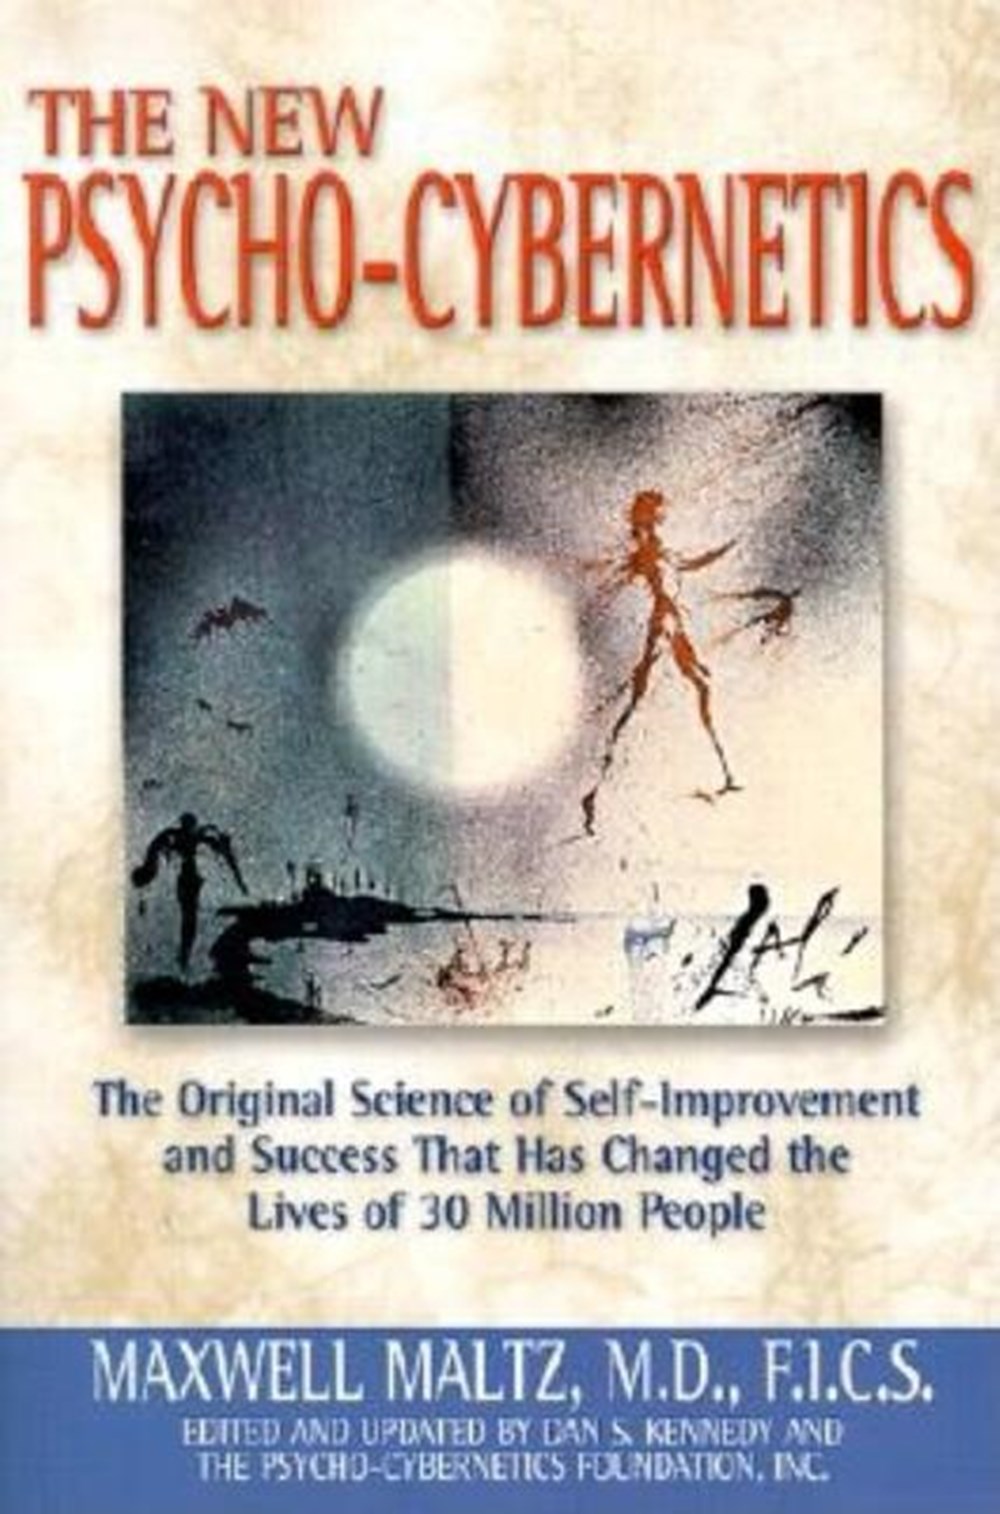 New Psycho-Cybernetics: The Original Science of Self-Improvement and Success That Has Changed the Li